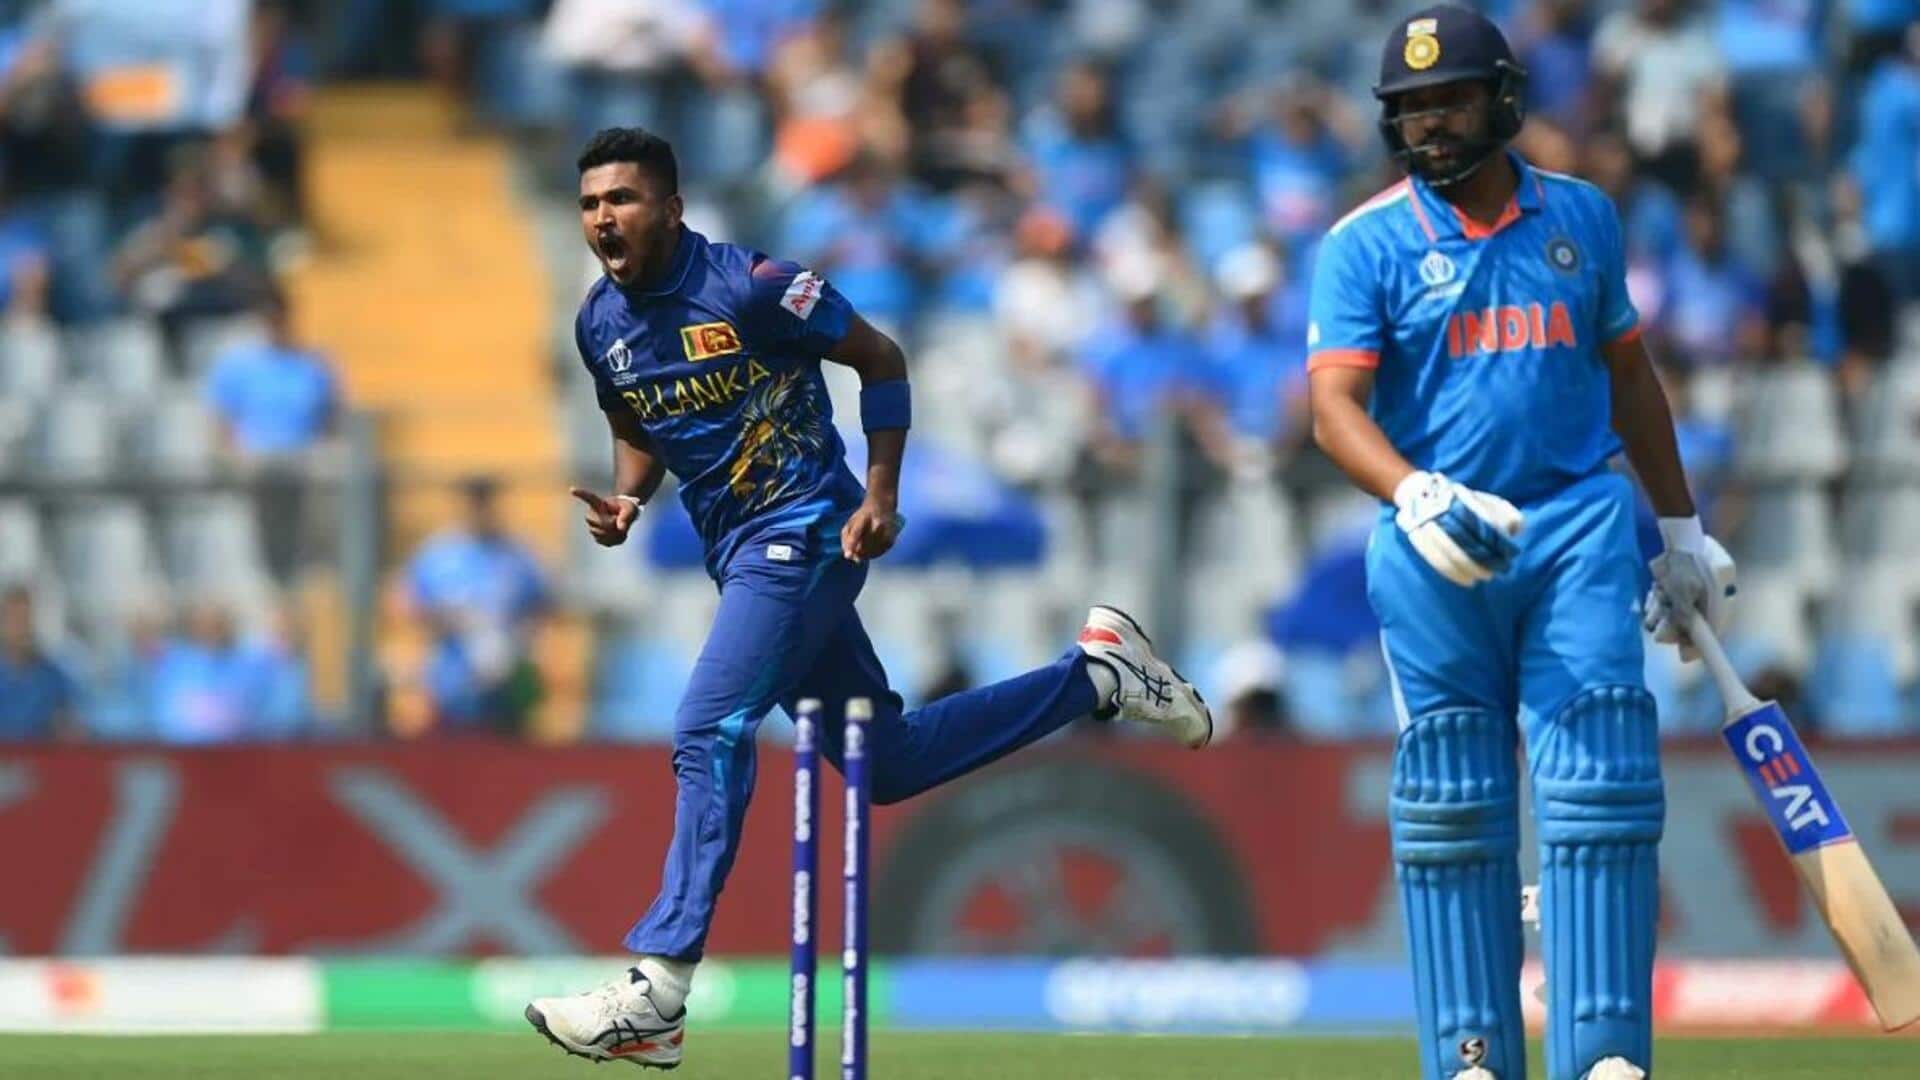 Dilshan Madushanka goes to Mumbai Indians for Rs. 4.60 crore